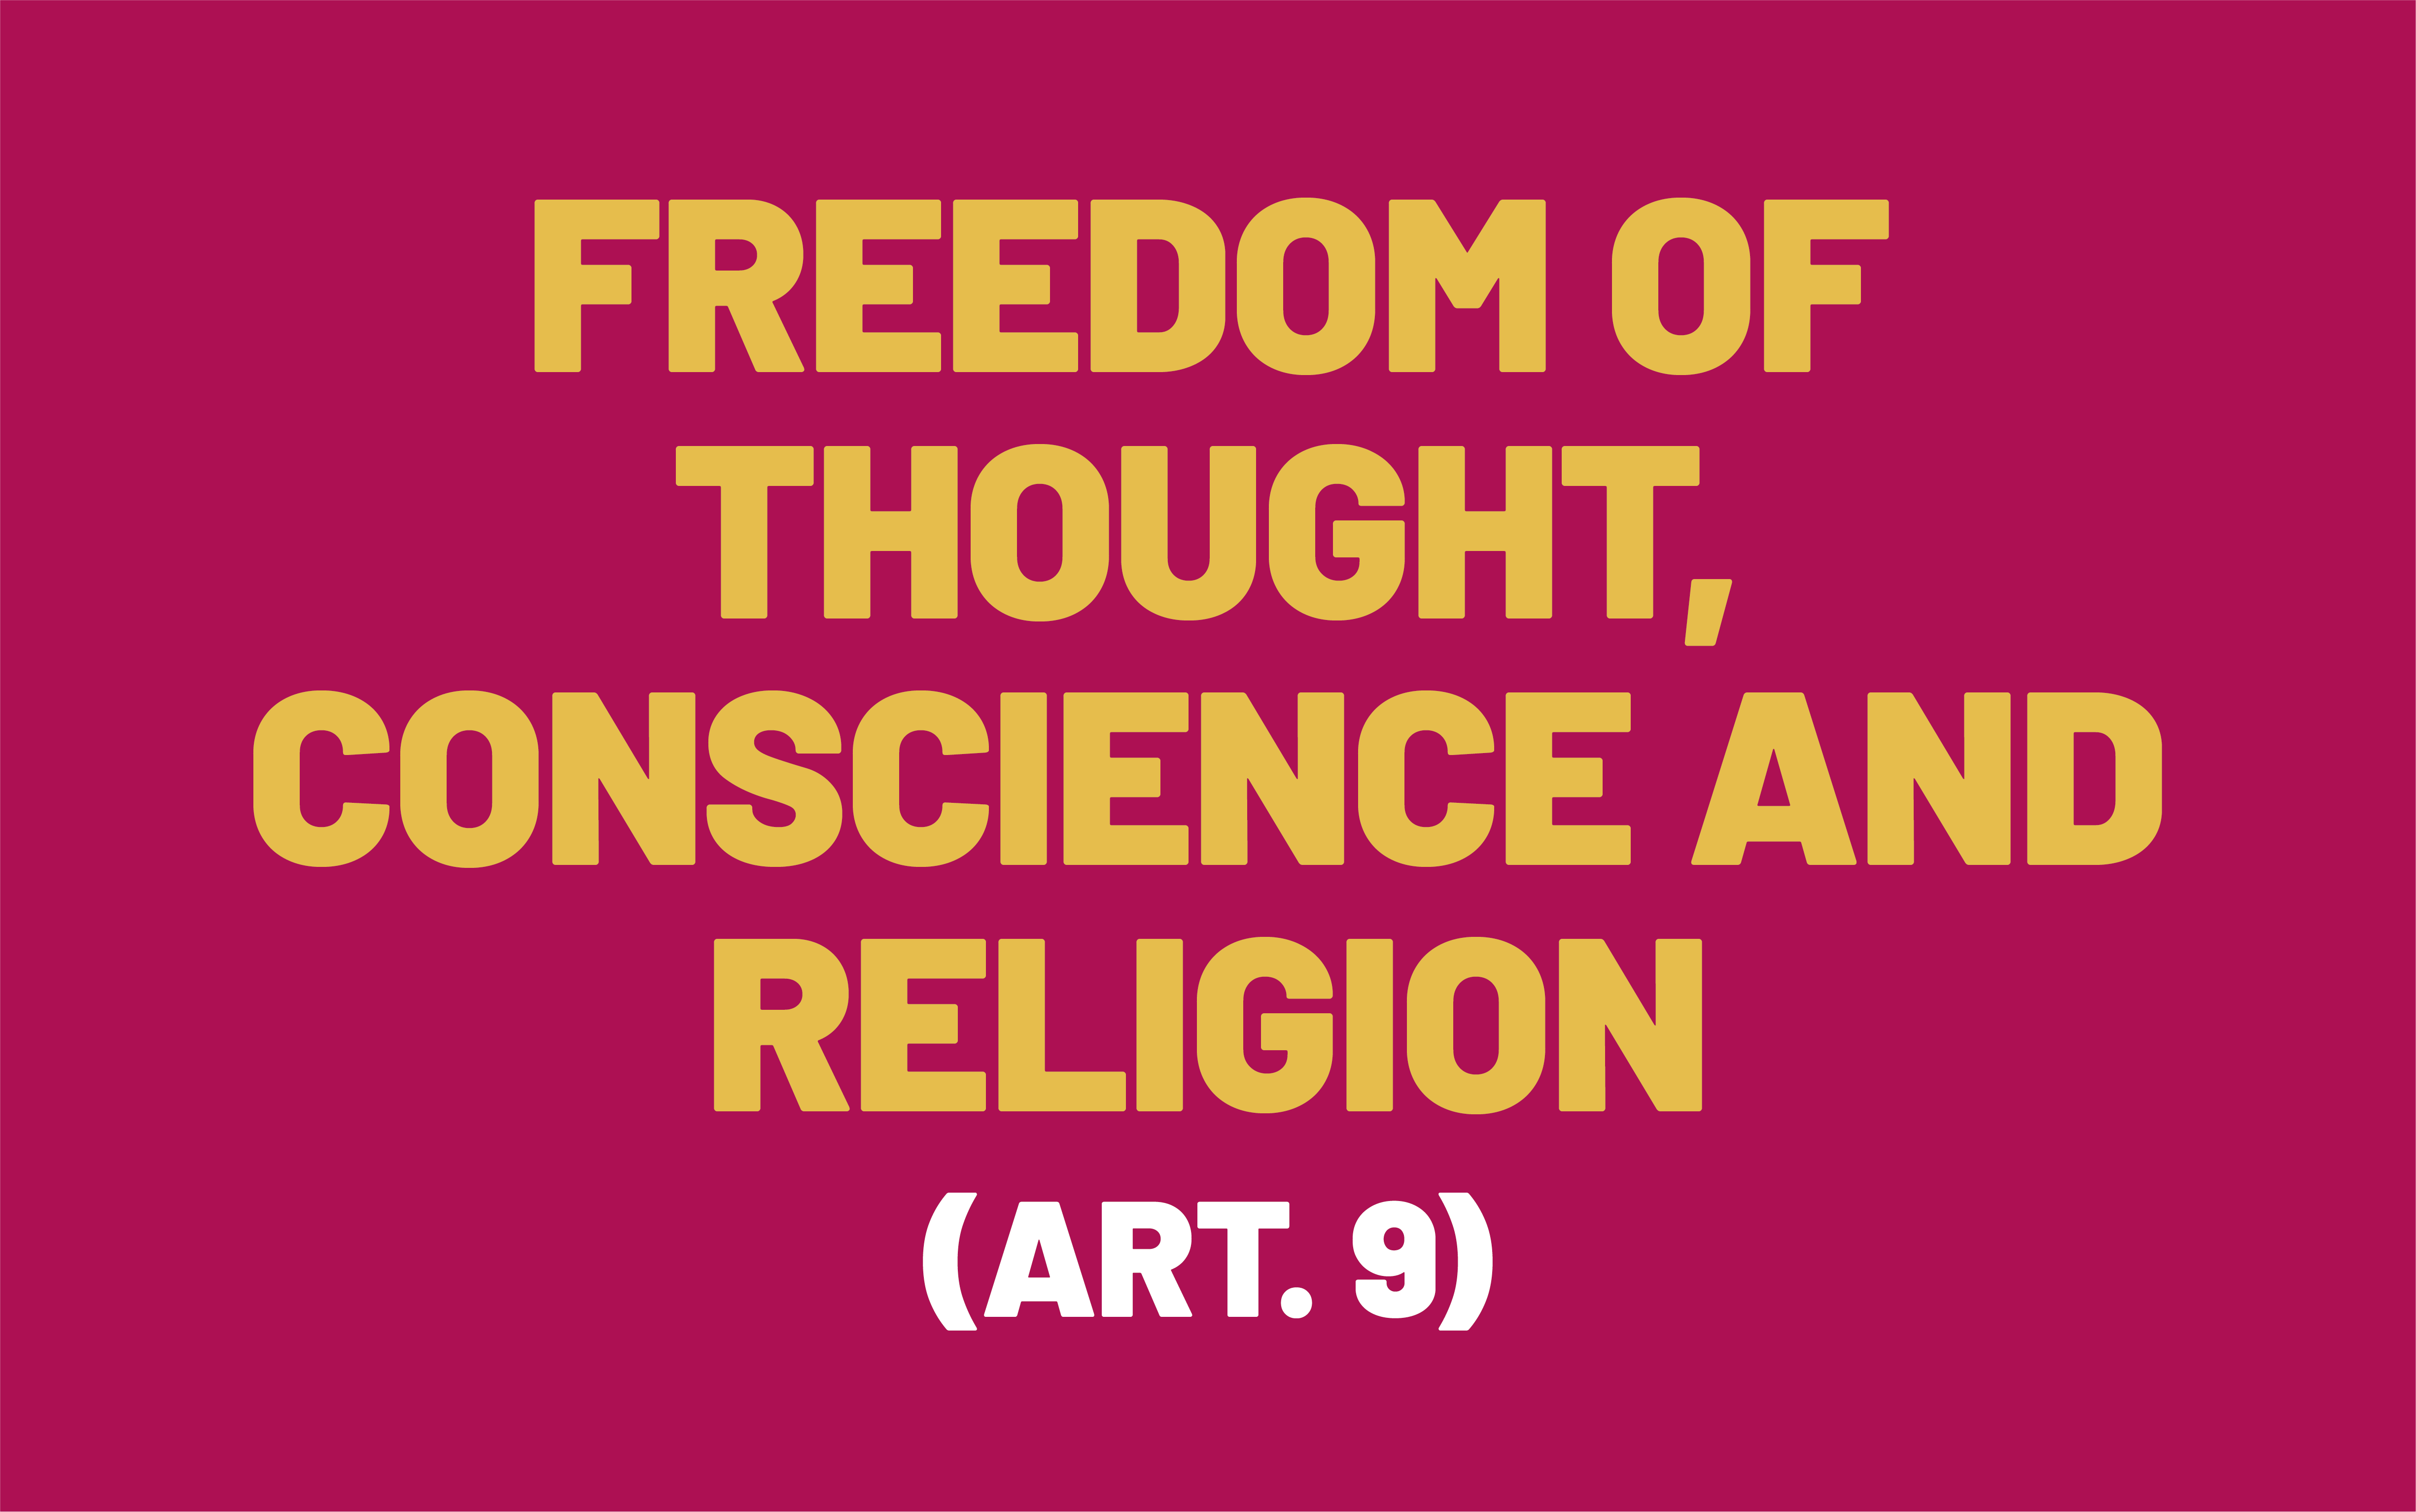 The image reproduces the wording of Article 9 of the European Convention on Human Rights, which reads: "Freedom of thought, conscience and religion".  